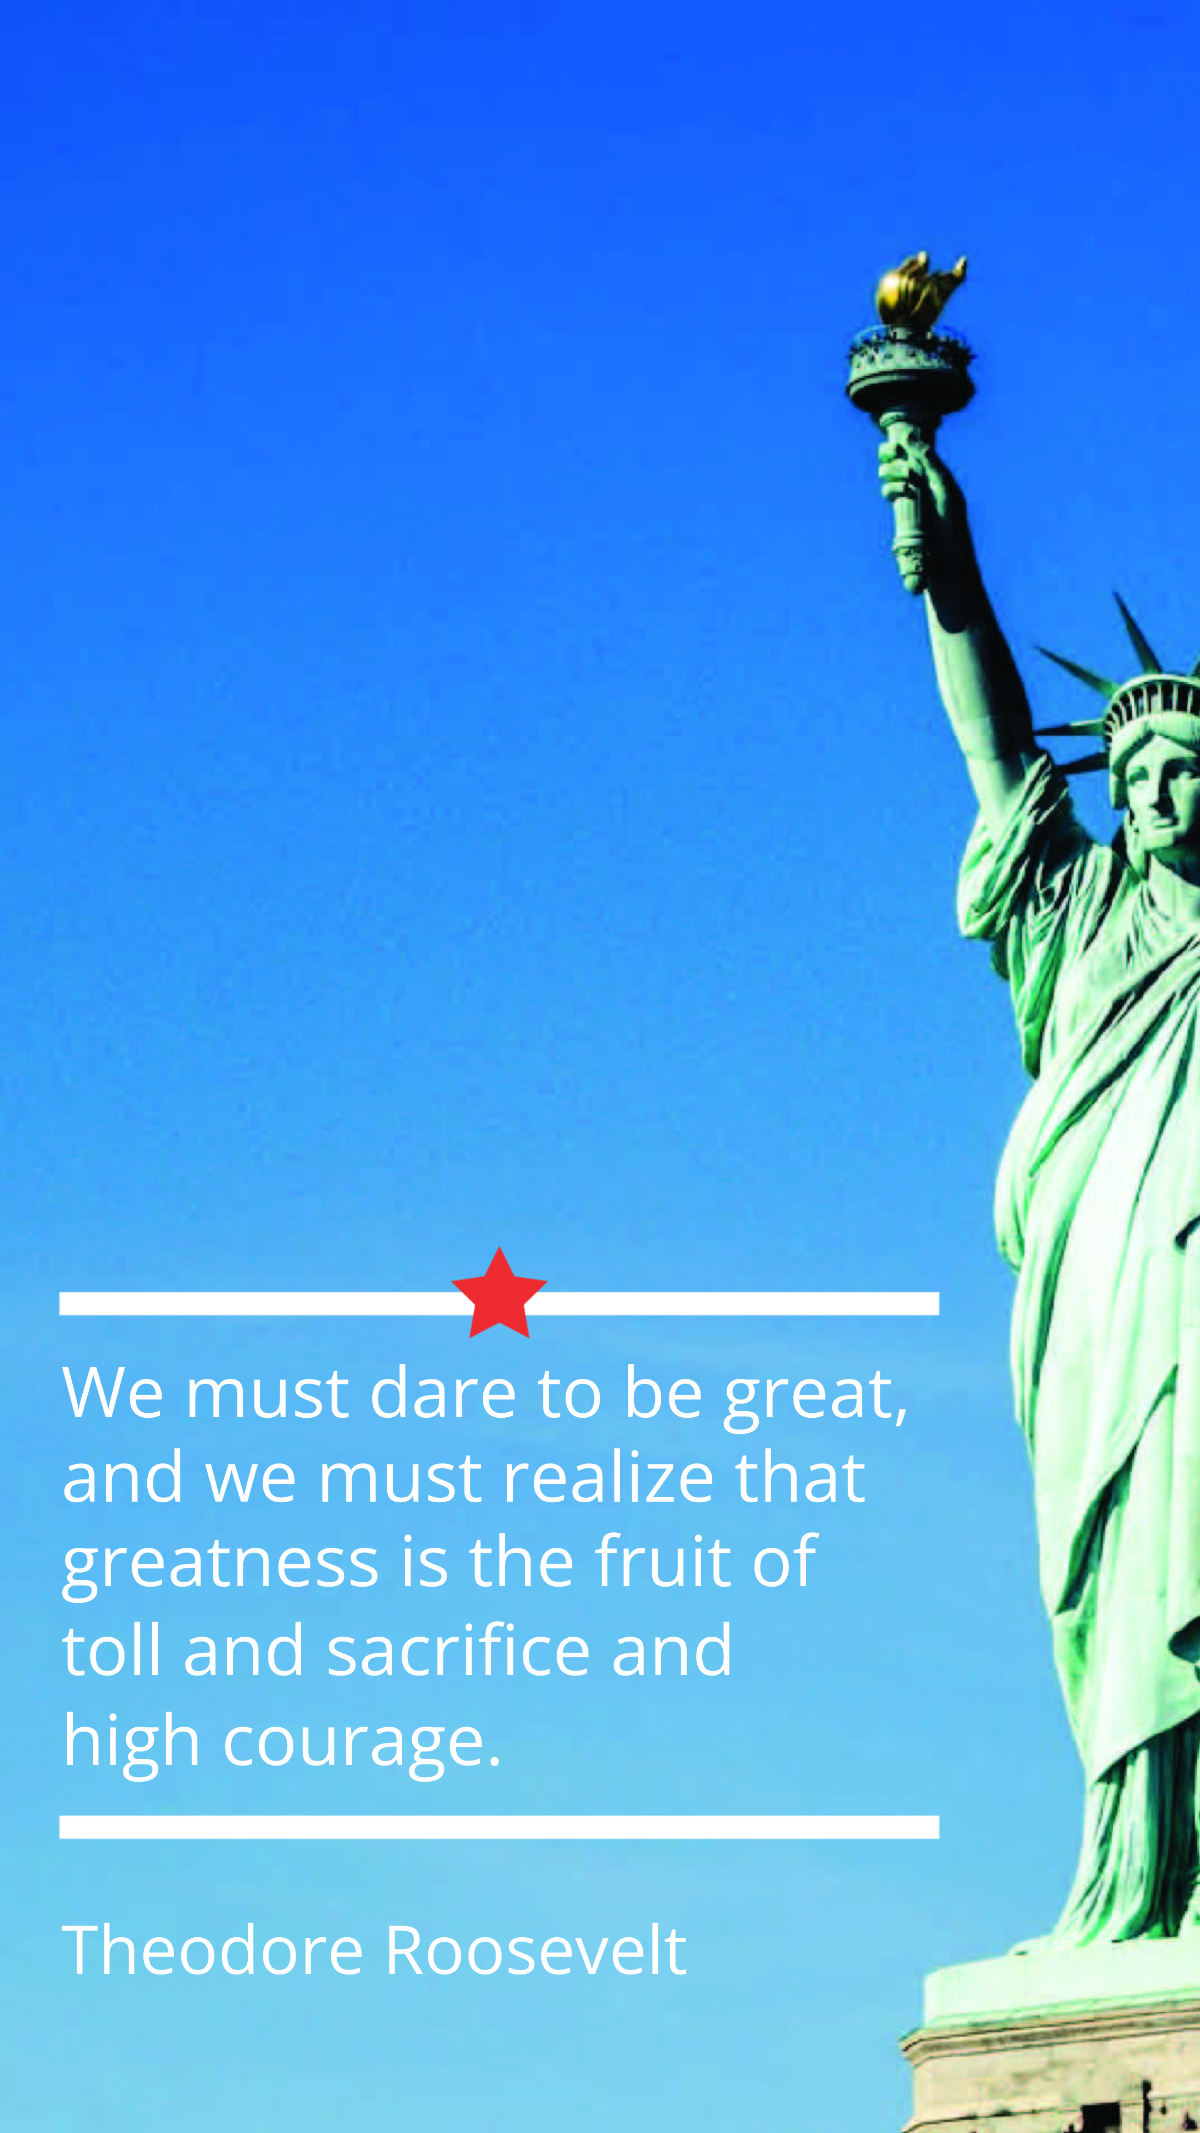 Theodore Roosevelt - We must dare to be great, and we must realize that greatness is the fruit of toll and sacrifice and high courage.